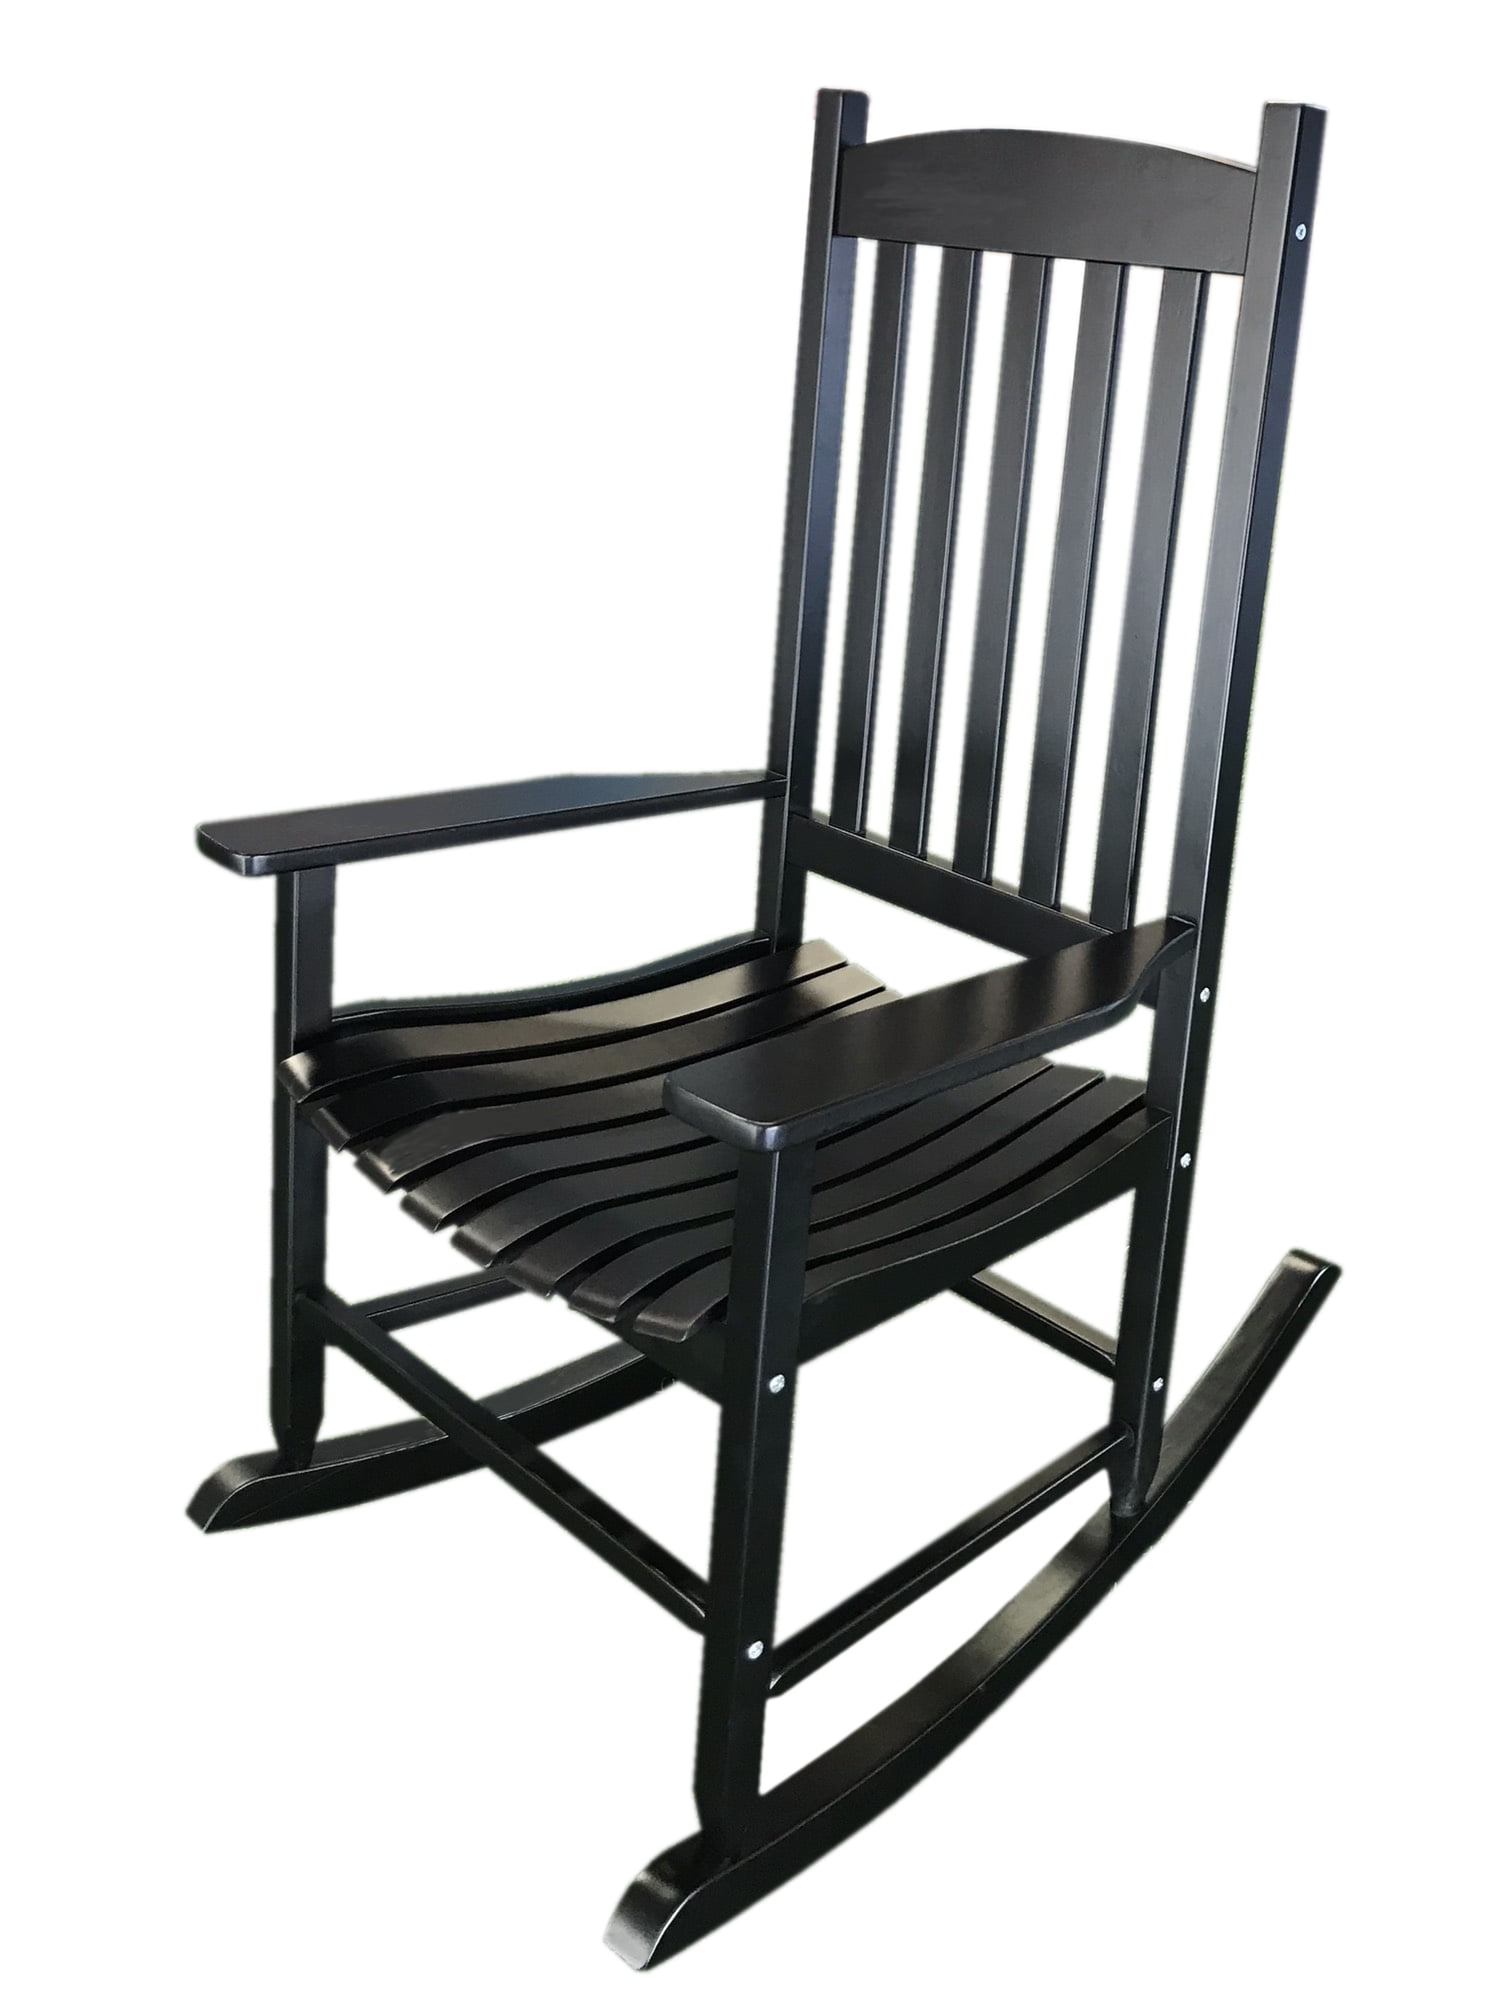 Black Color Details about   Outdoor Wood Porch Rocking Chair Weather Resistant by Mainstays 